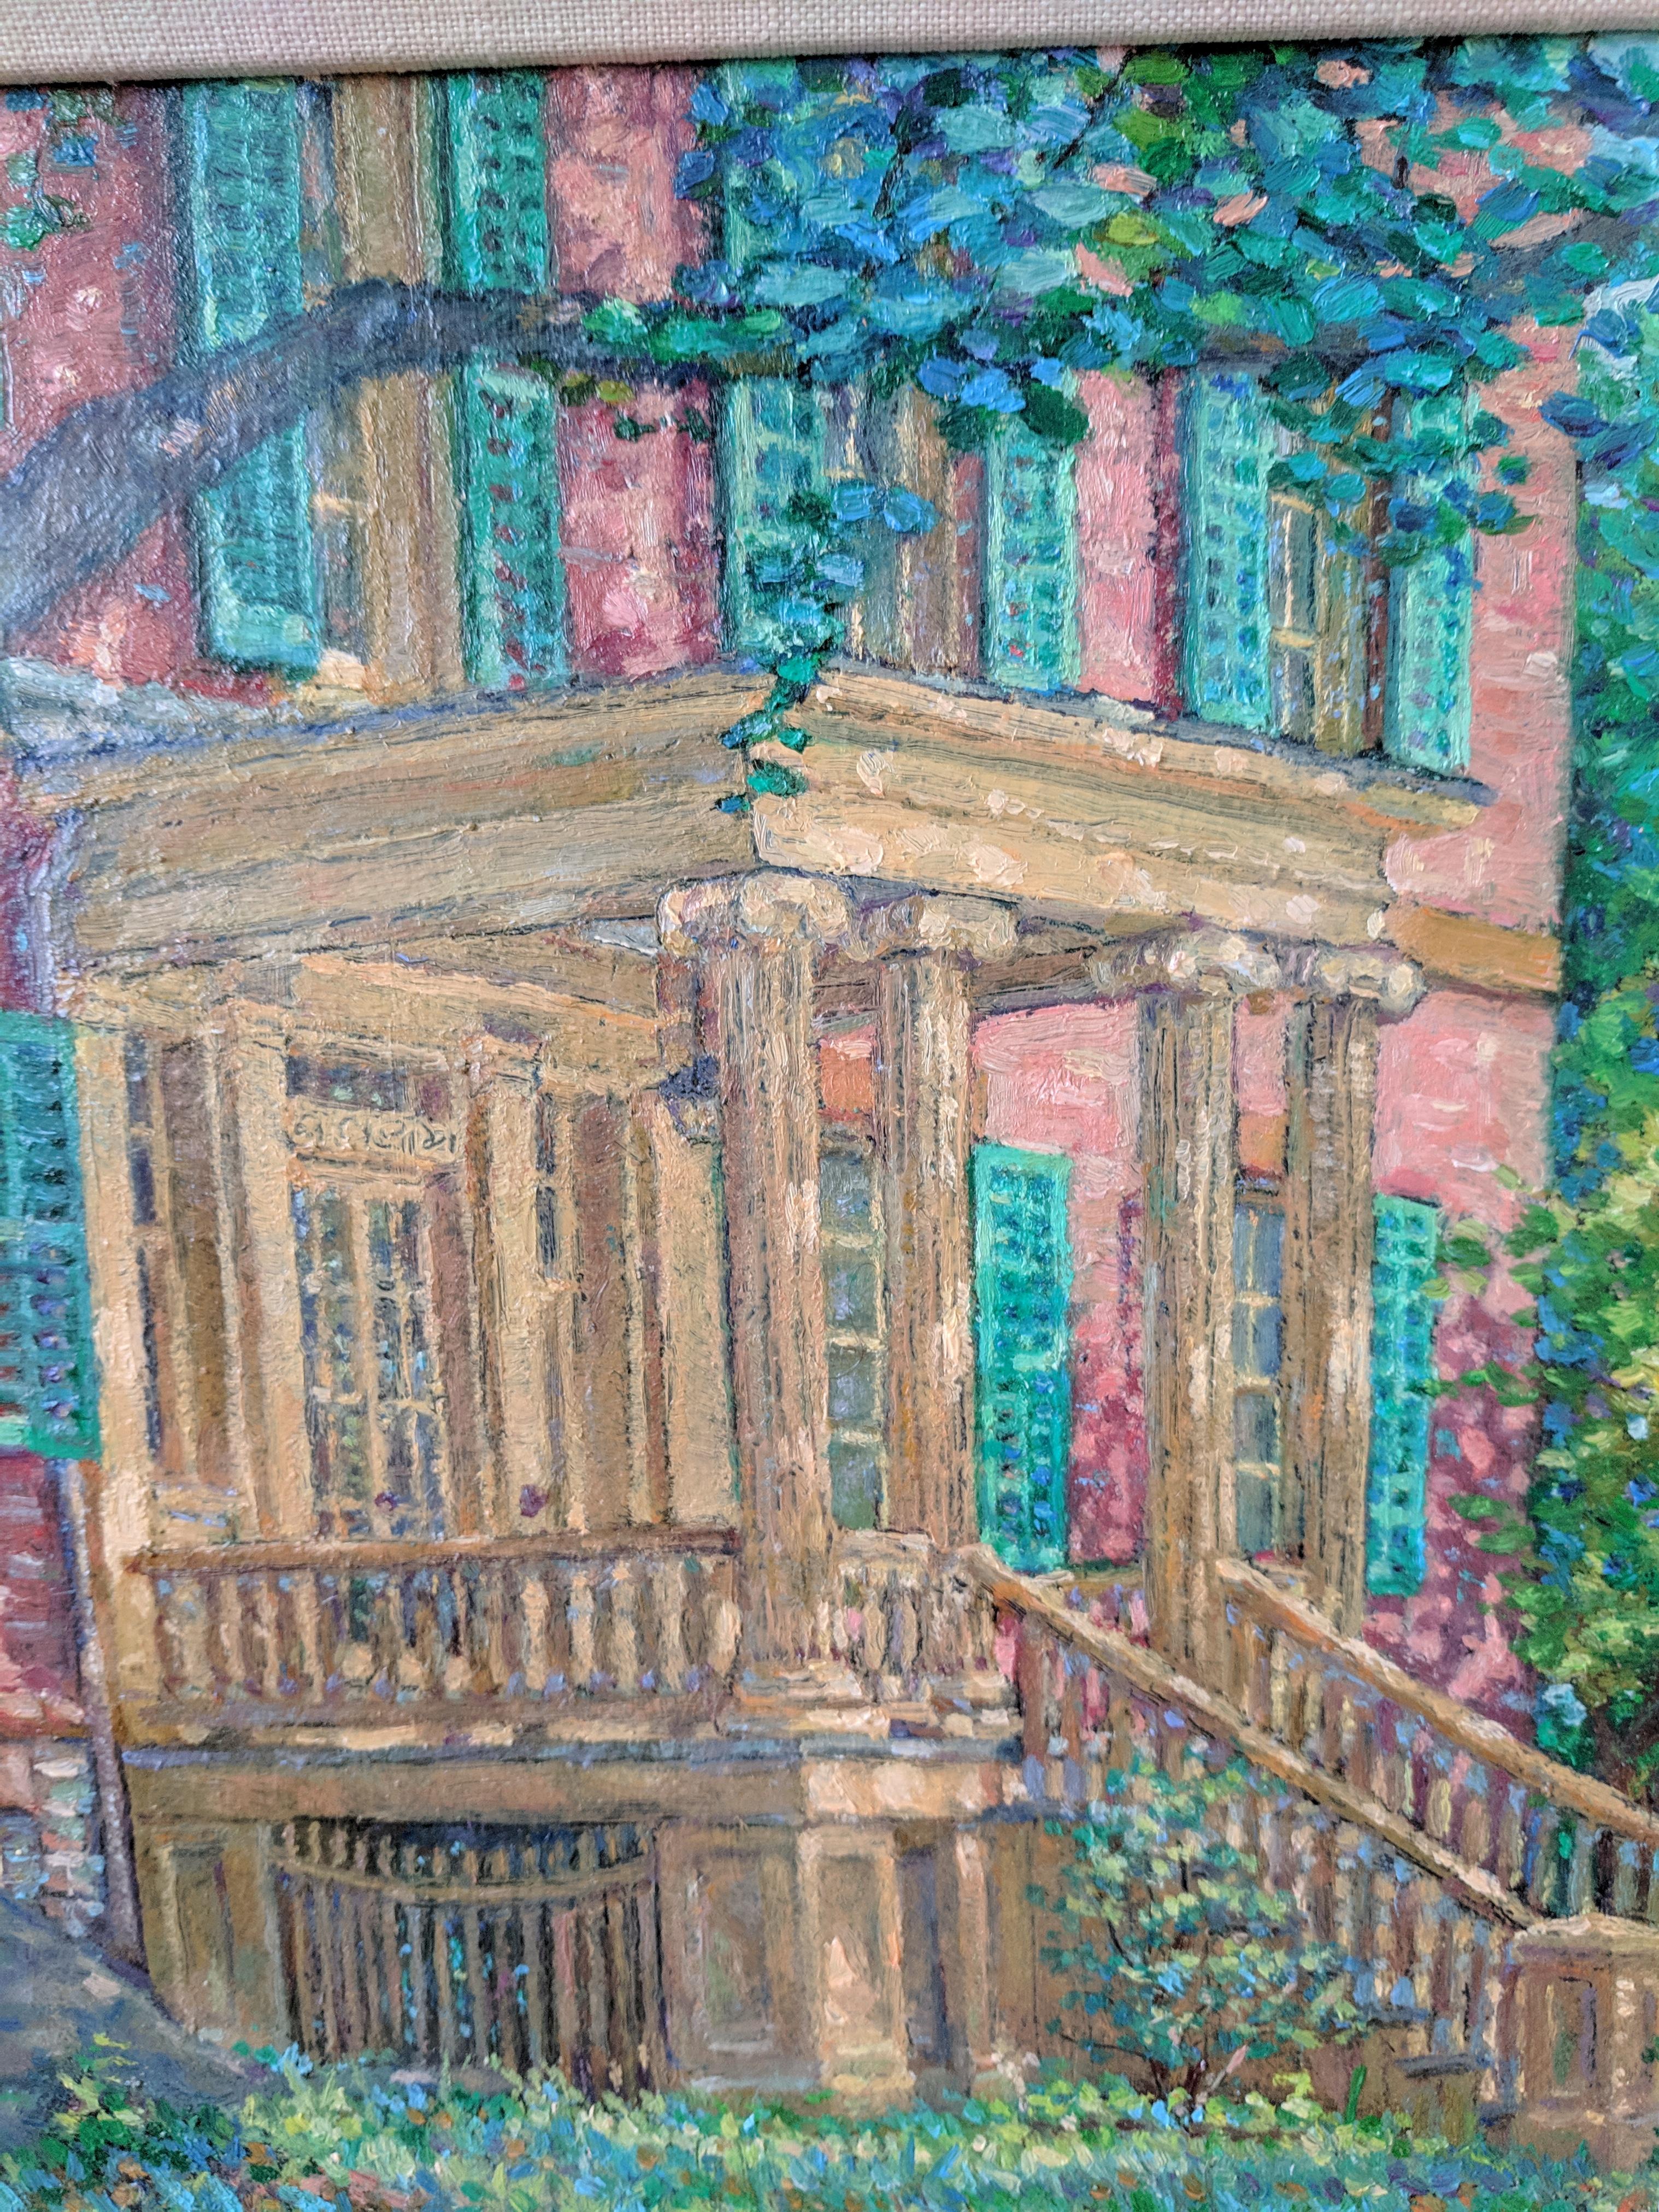 This is an oil painting on linen featuring a historic house from the 1790s in Albany, NY during the Patroon period. Ten Broeck Mansion is a  house-museum, and the painting showcases the columns constructed in Greek-Revival style when the house was